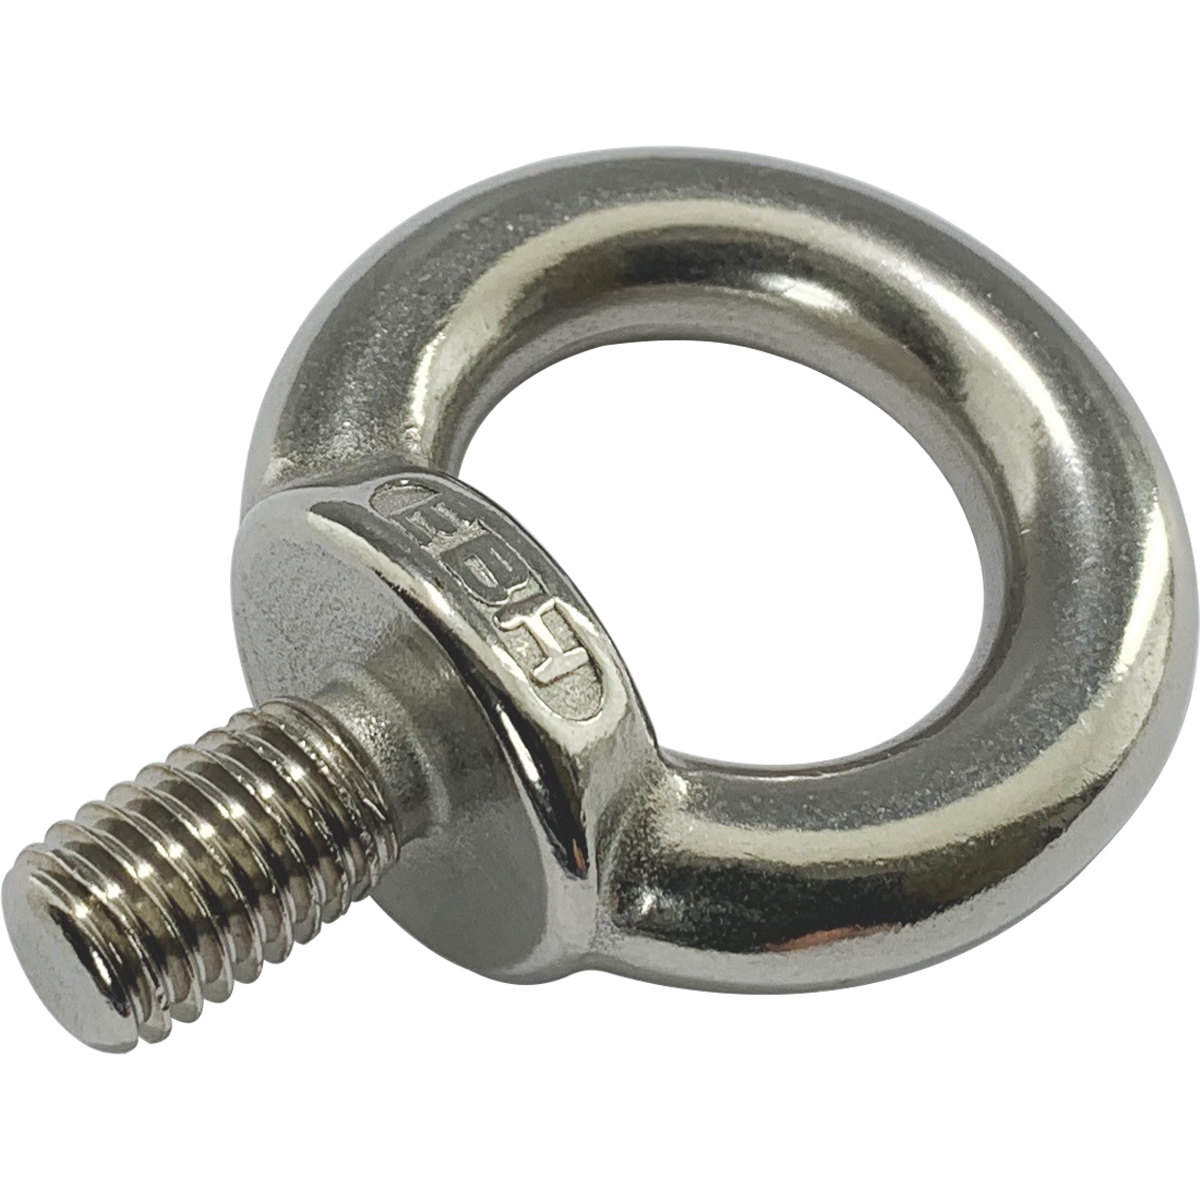 Lifting eye bolts - A thick circular ring of metal with a threaded section.